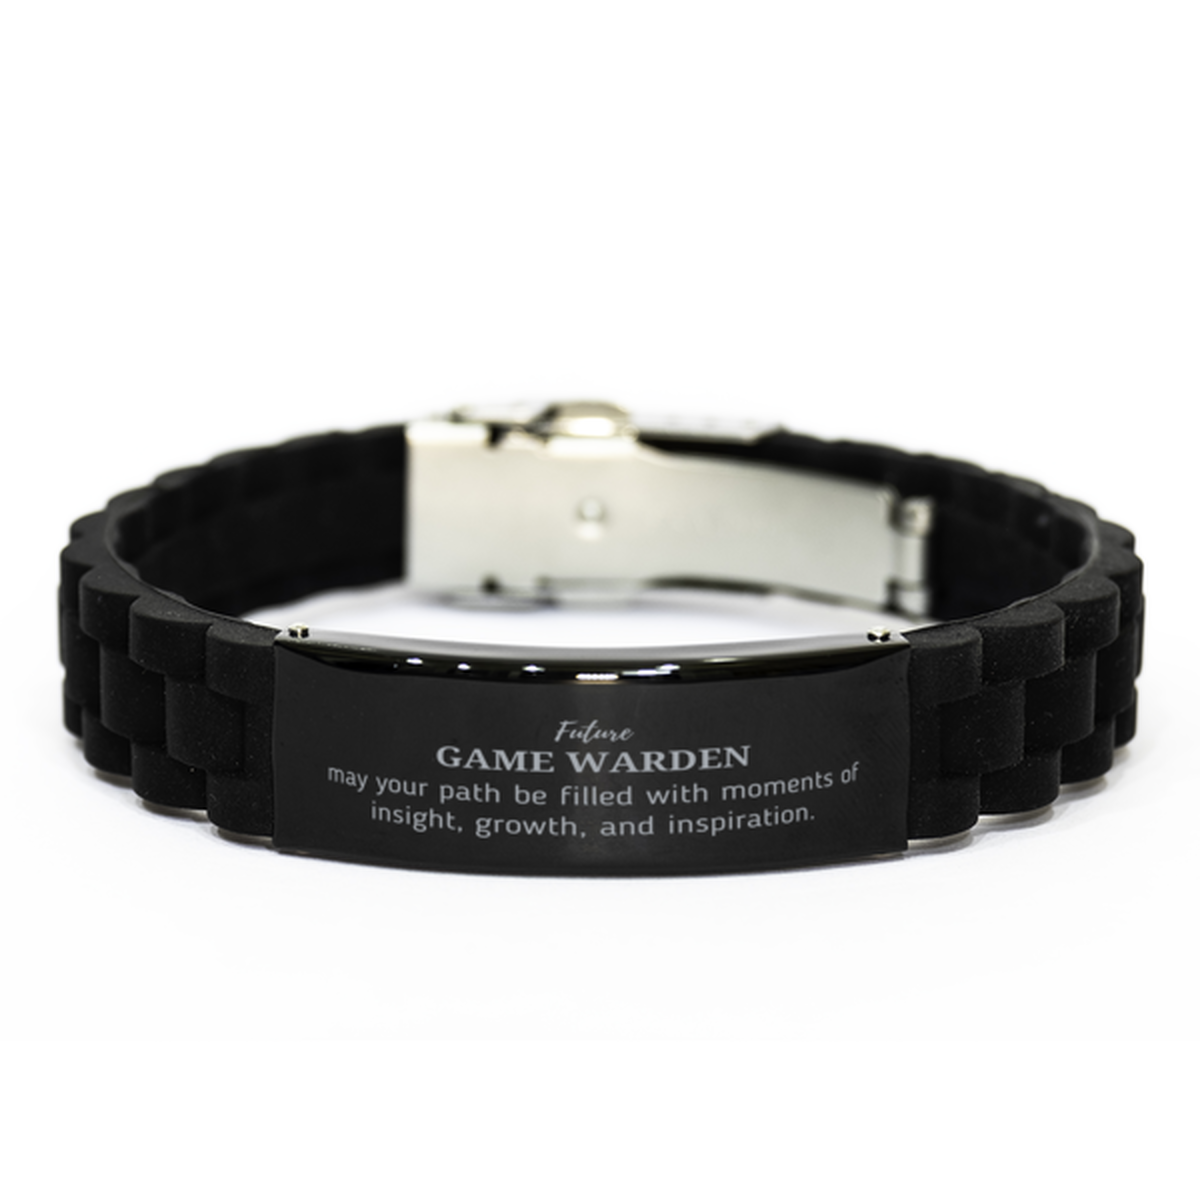 Future Game Warden Gifts, May your path be filled with moments of insight, Graduation Gifts for New Game Warden, Christmas Unique Black Glidelock Clasp Bracelet For Men, Women, Friends